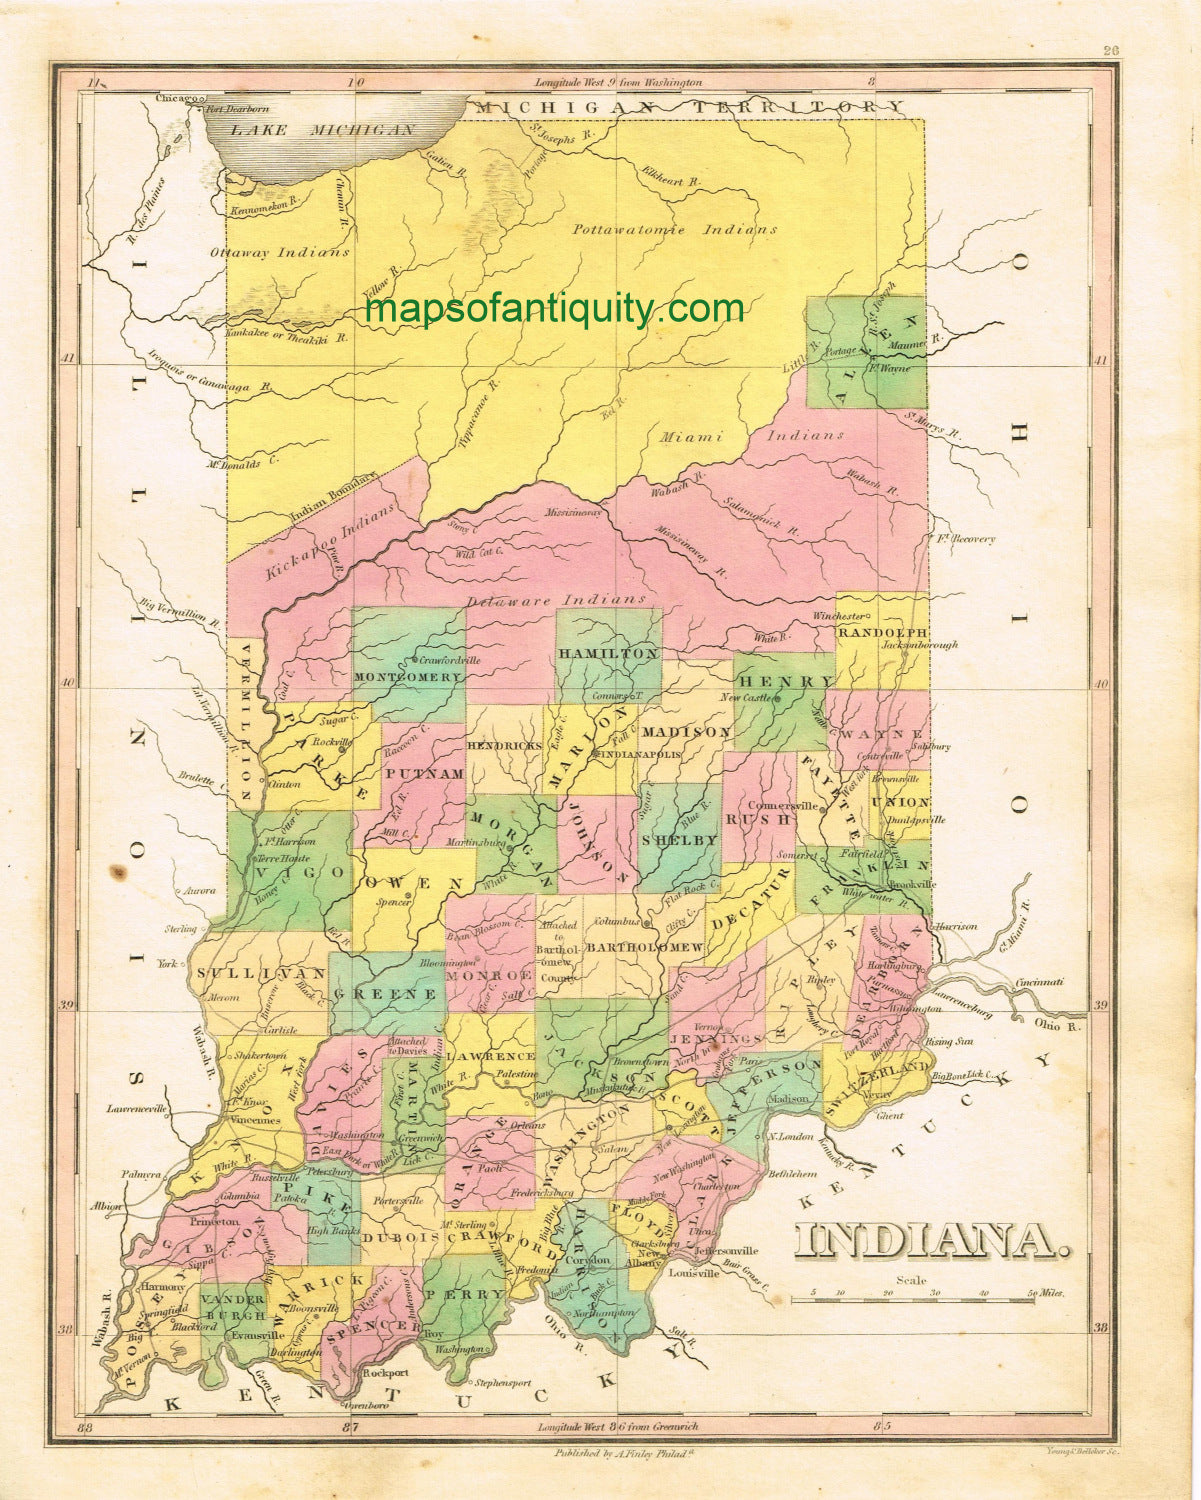 Antique-Hand-Colored-Map-Indiana.-**********-United-States-Midwest-1826-Anthony-Finley-Maps-Of-Antiquity